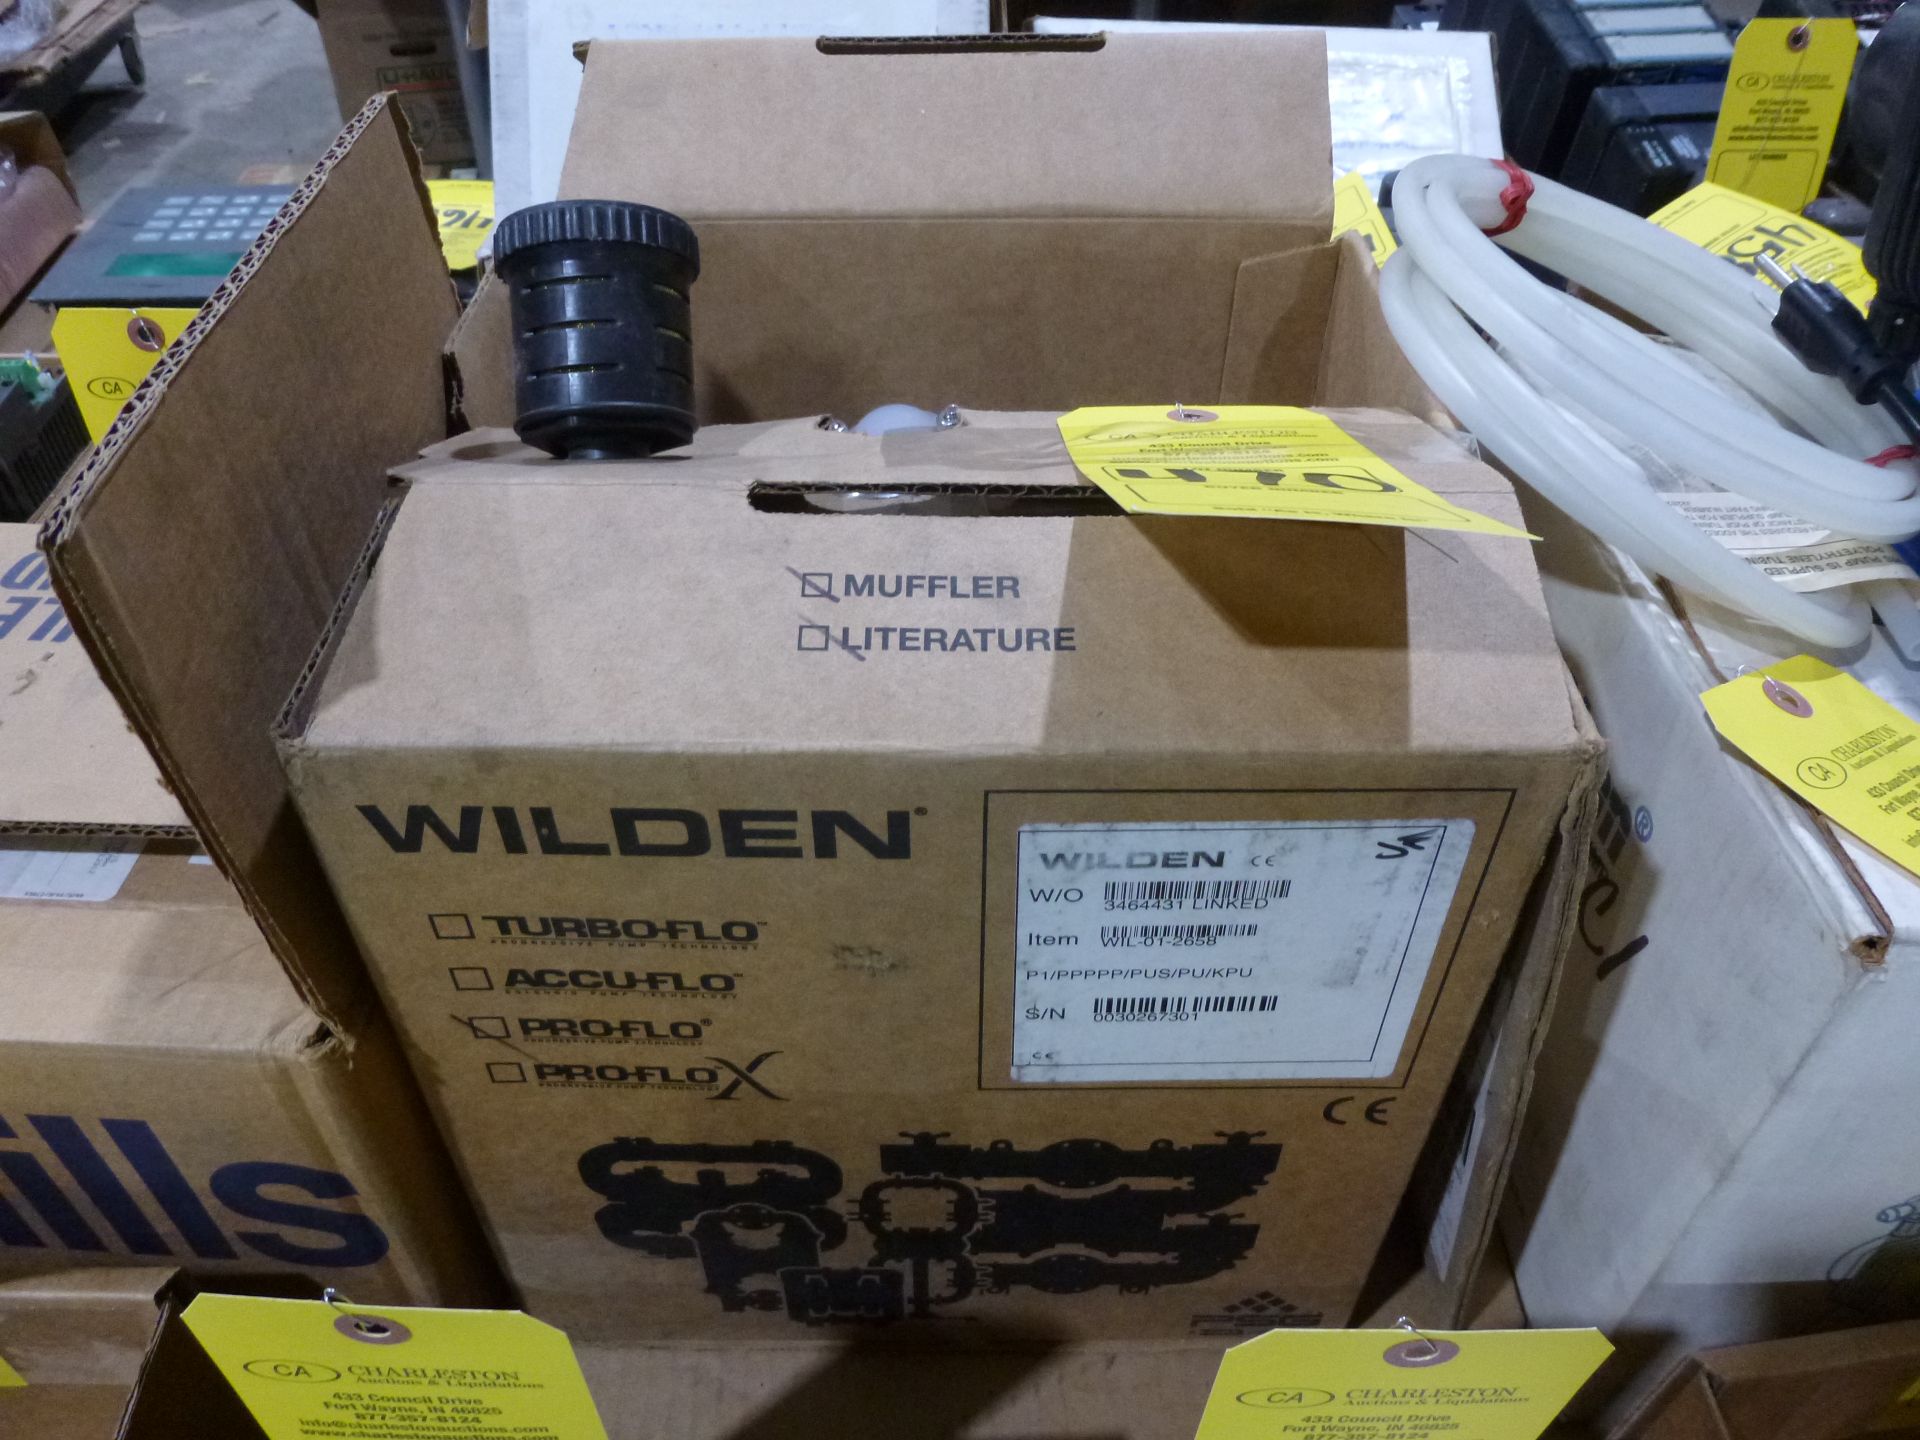 Wilden pump part number P1/PPPPP/PUS/PU/KPU, new in box, as always with Brolyn LLC auctions, all - Image 2 of 4